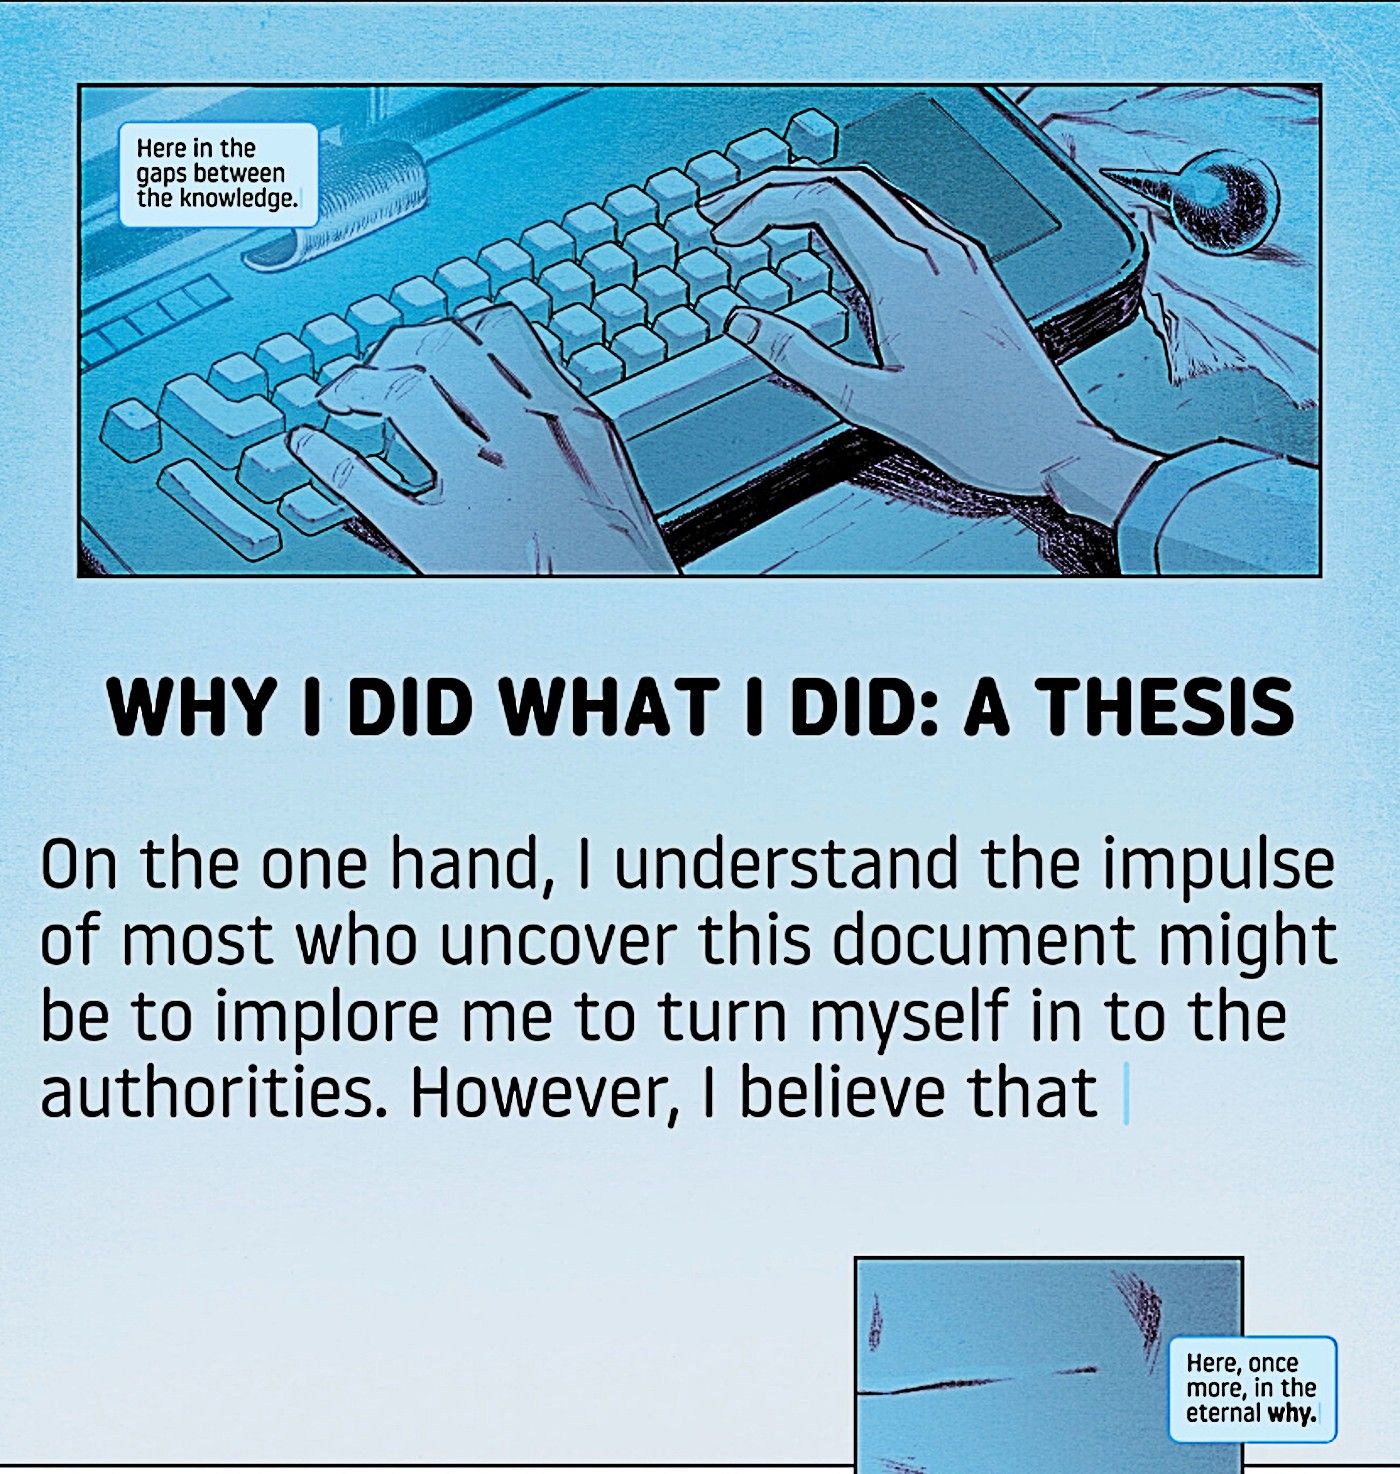 Six Fingers #1, Joe Vale begins writing a paper about the murders he committed.